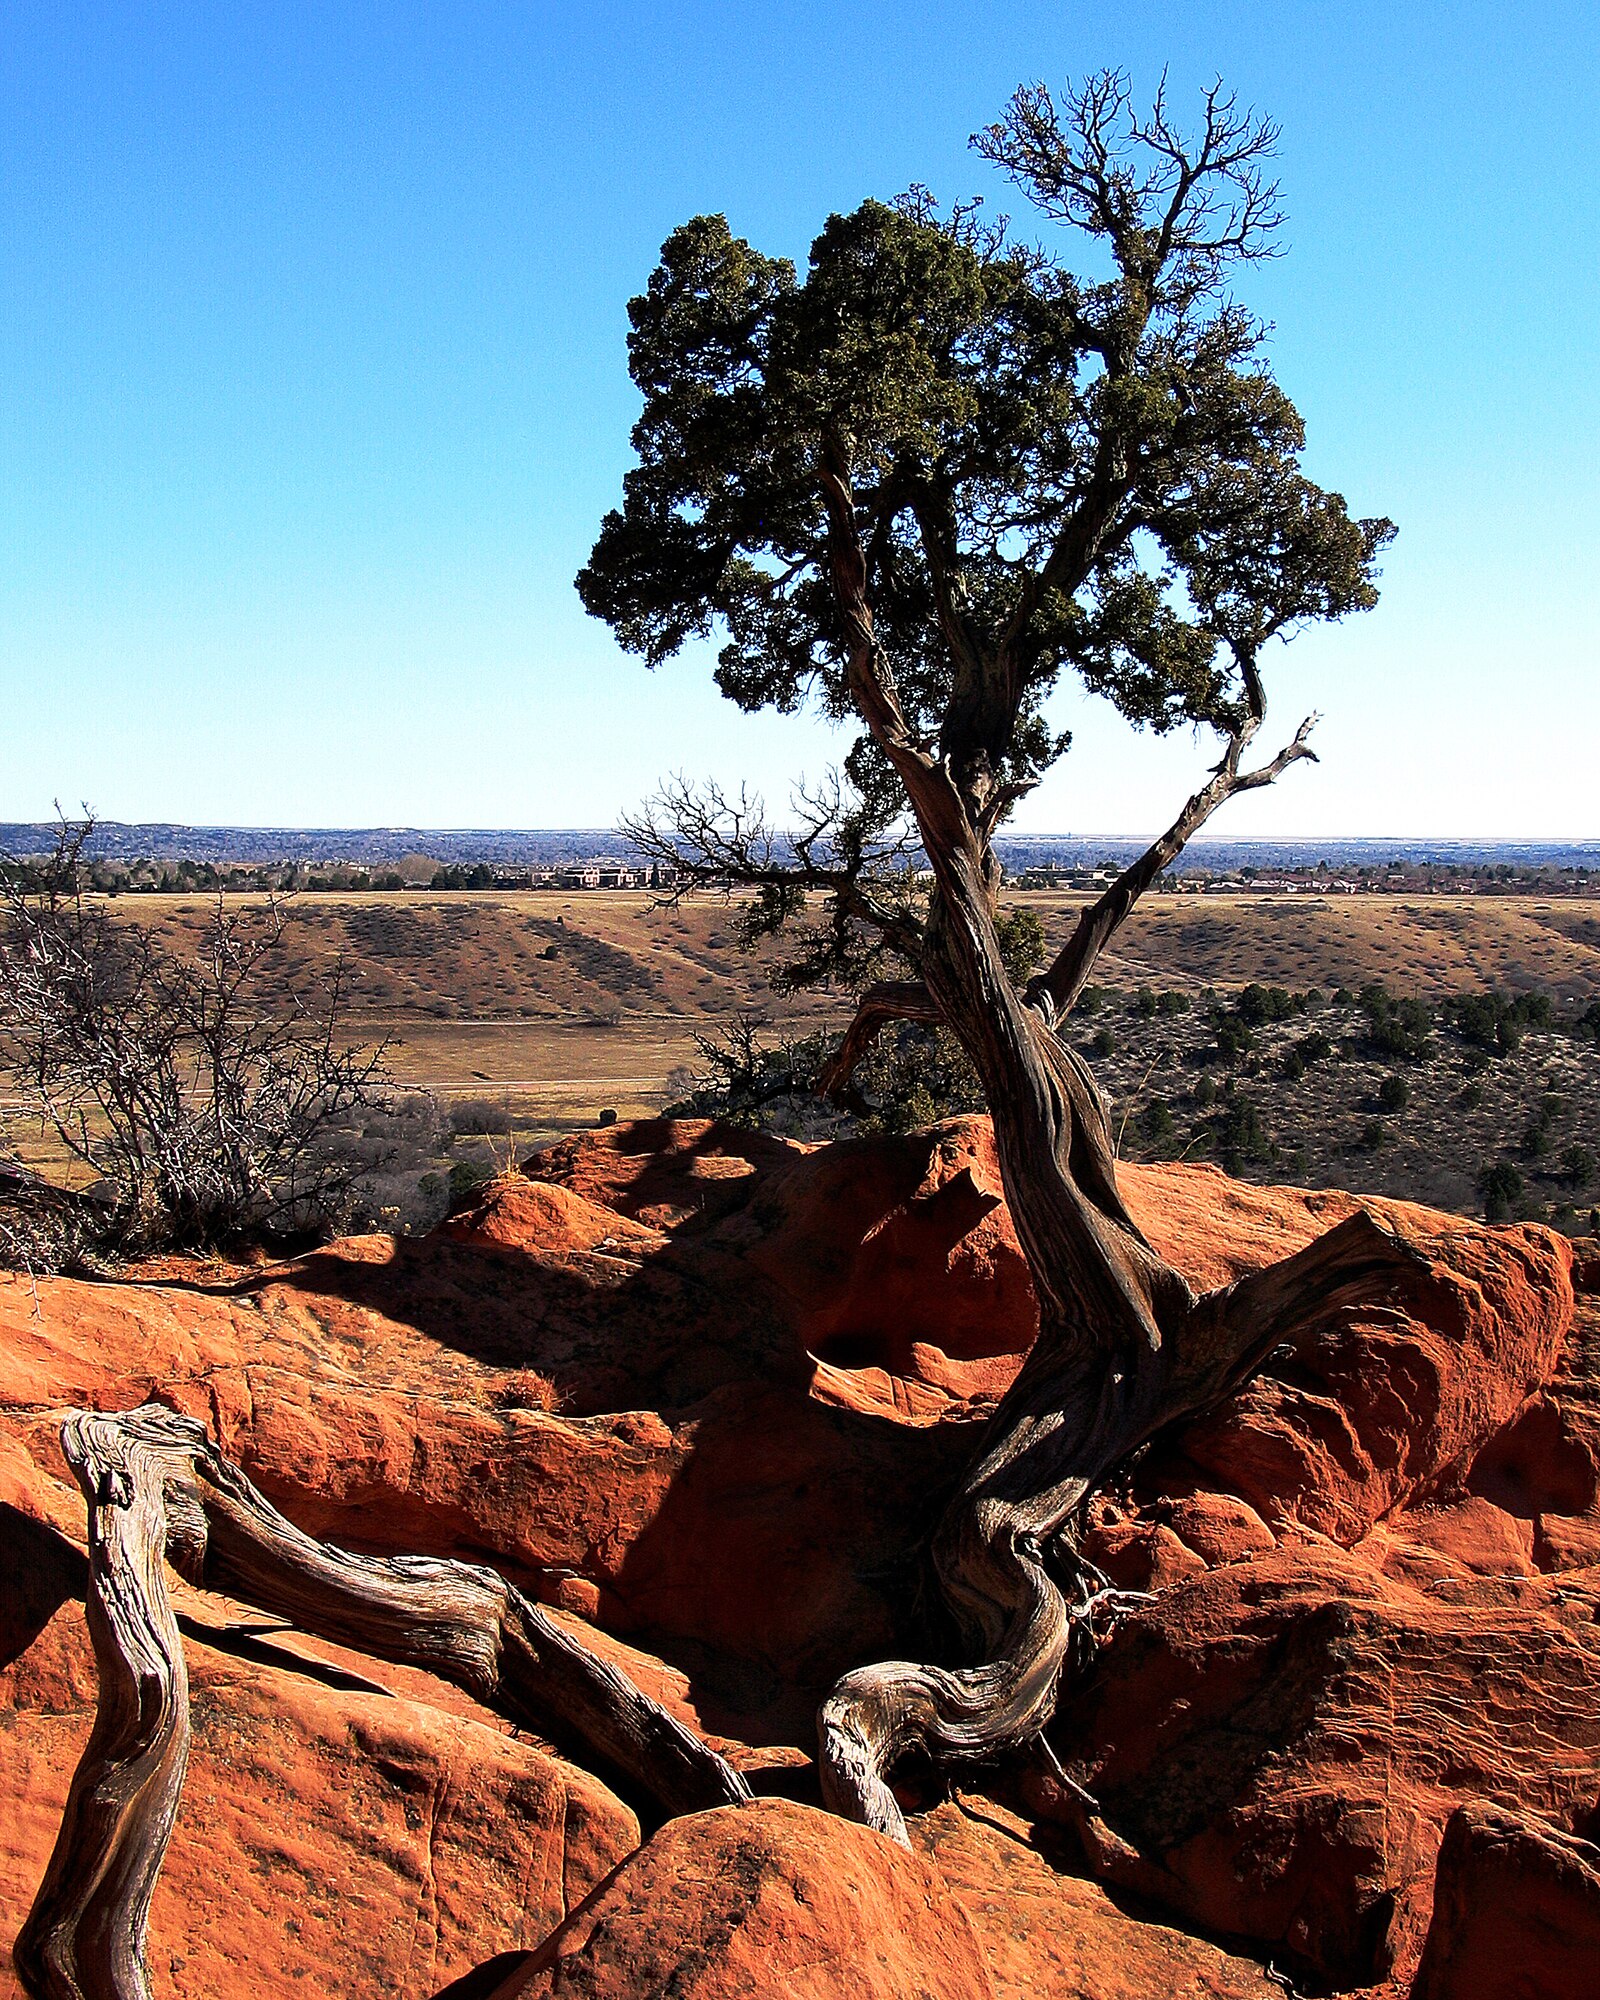 COLORADO SPRINGS, Colo. -- One of many trees at Garden of the Gods near Colorado Springs. Colorado has a wide variety of plant and animal life for servicemembers stationed at Front Range military bases to see. (U.S. Air Force photo by Staff Sgt. Steve Czyz)